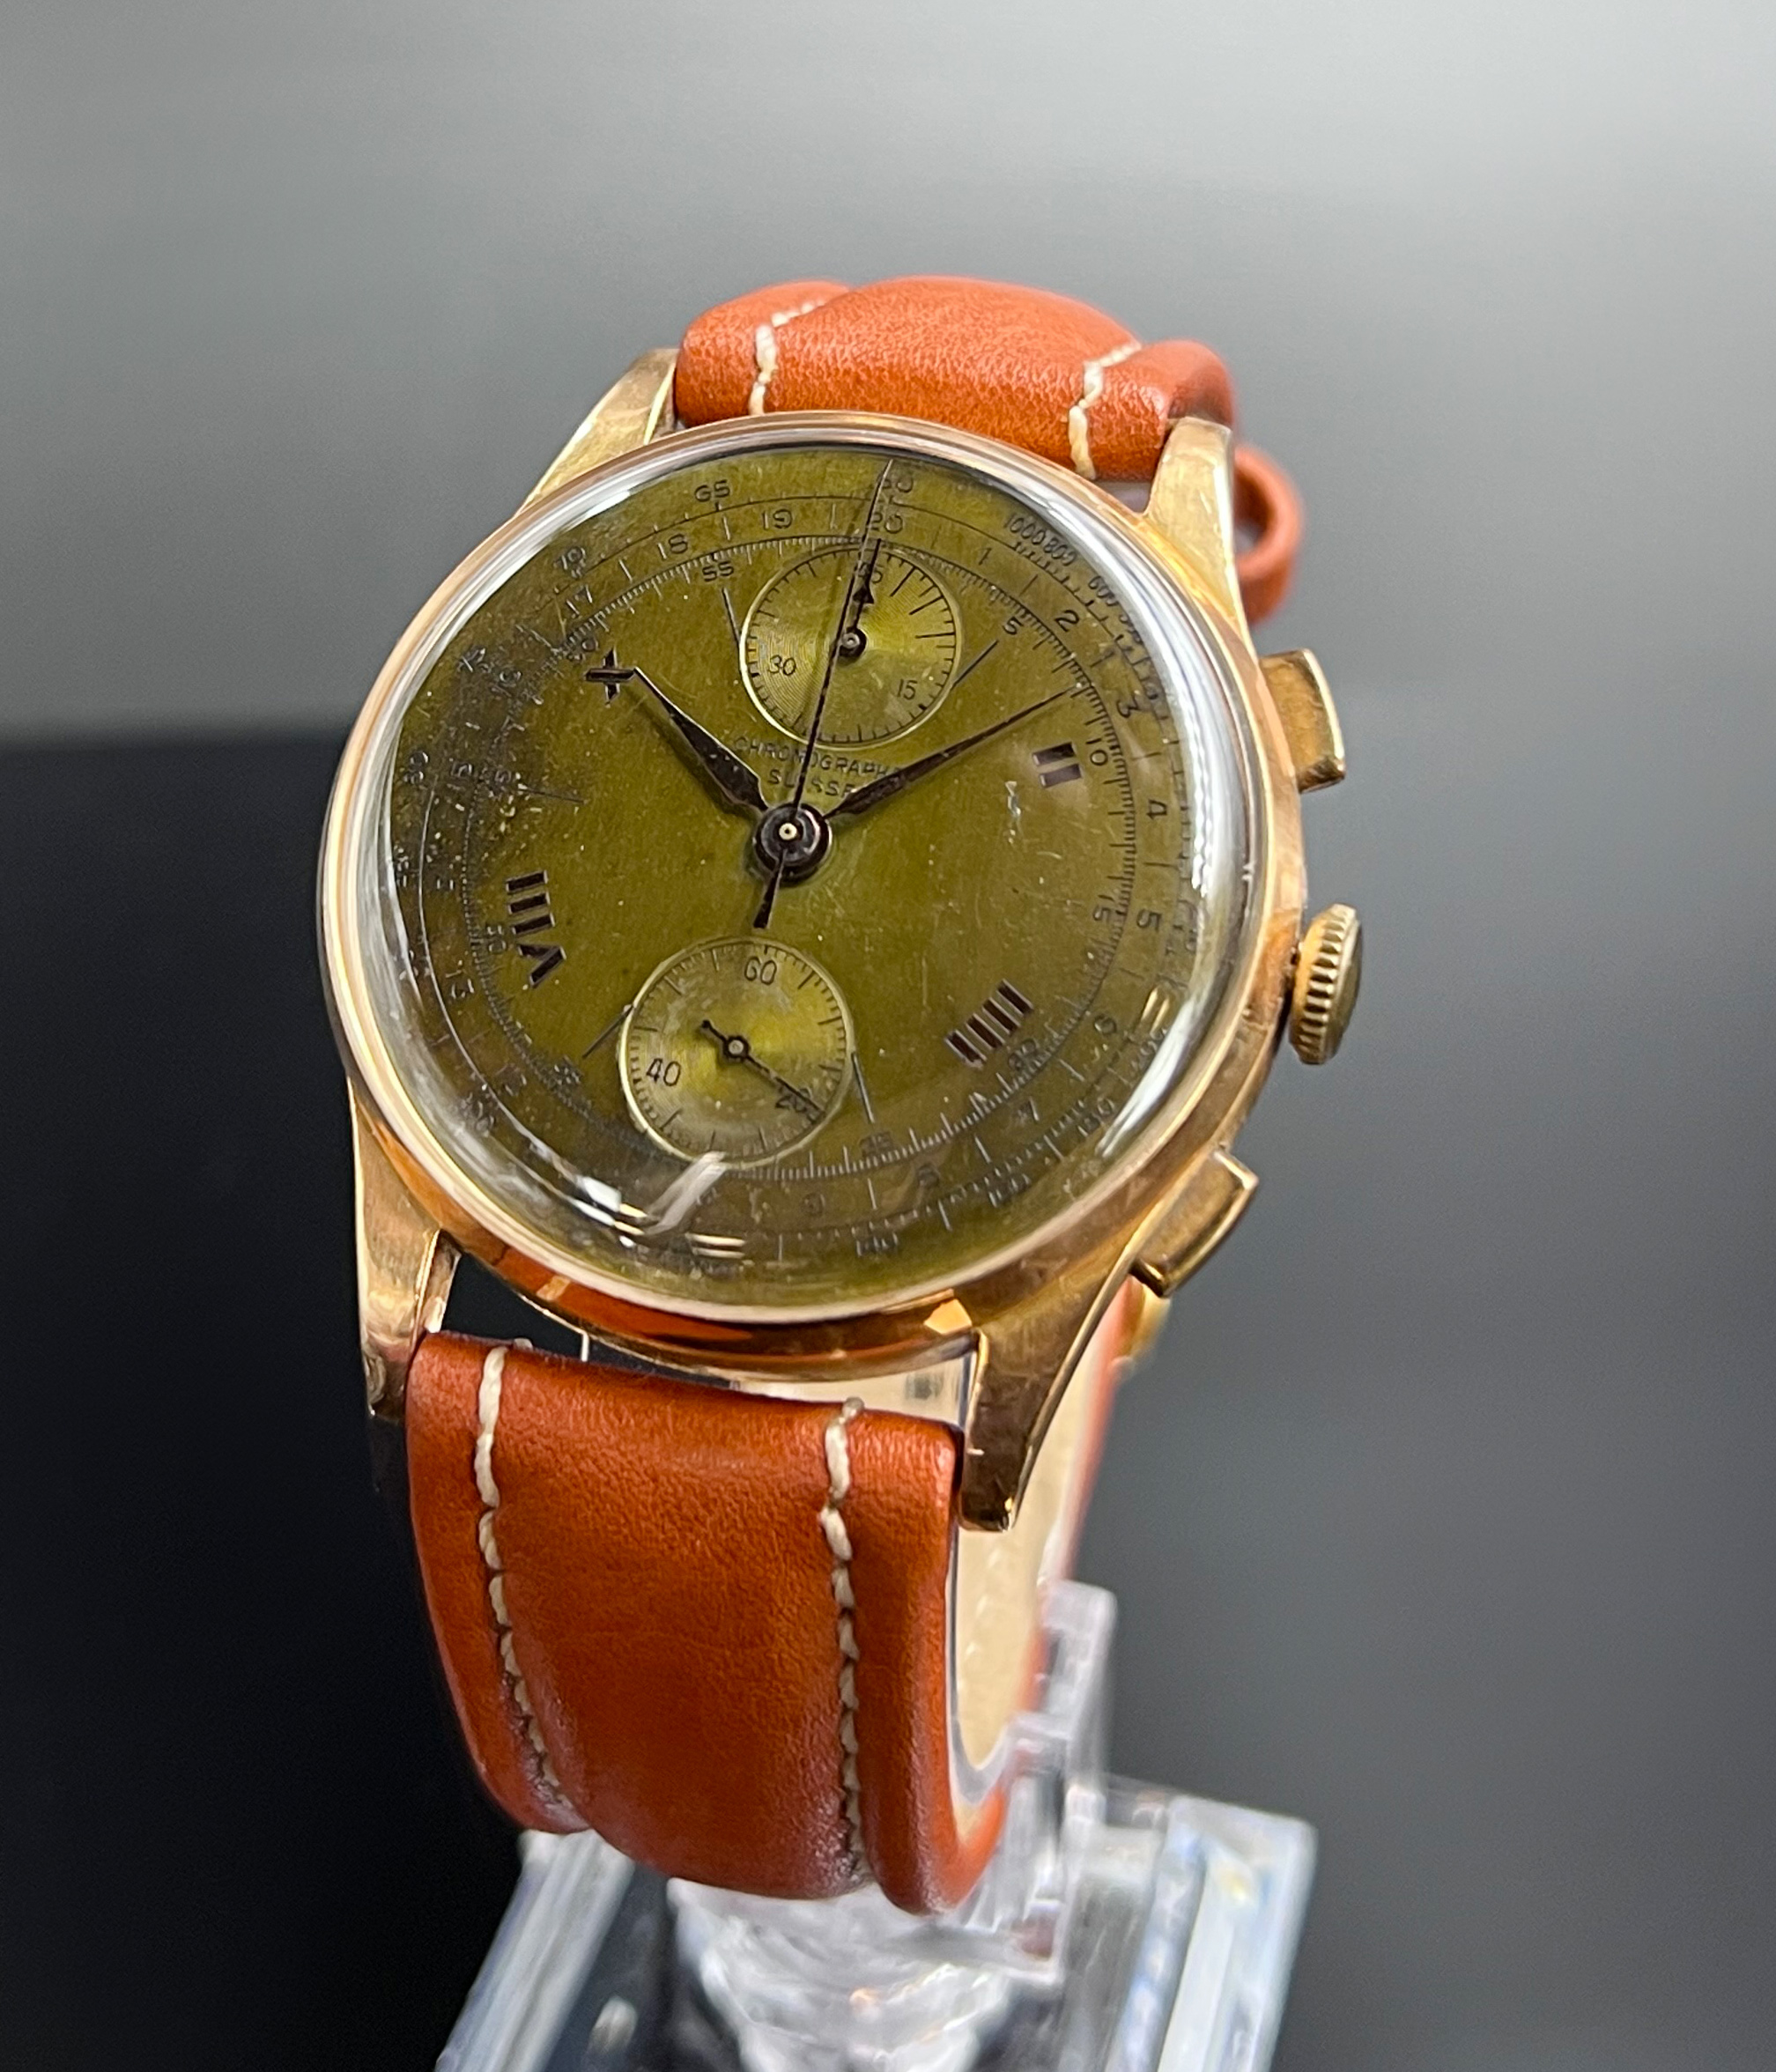 CHRONOGRAPHE SUISSE men's wristwatch. Case partly 750 yellow gold.